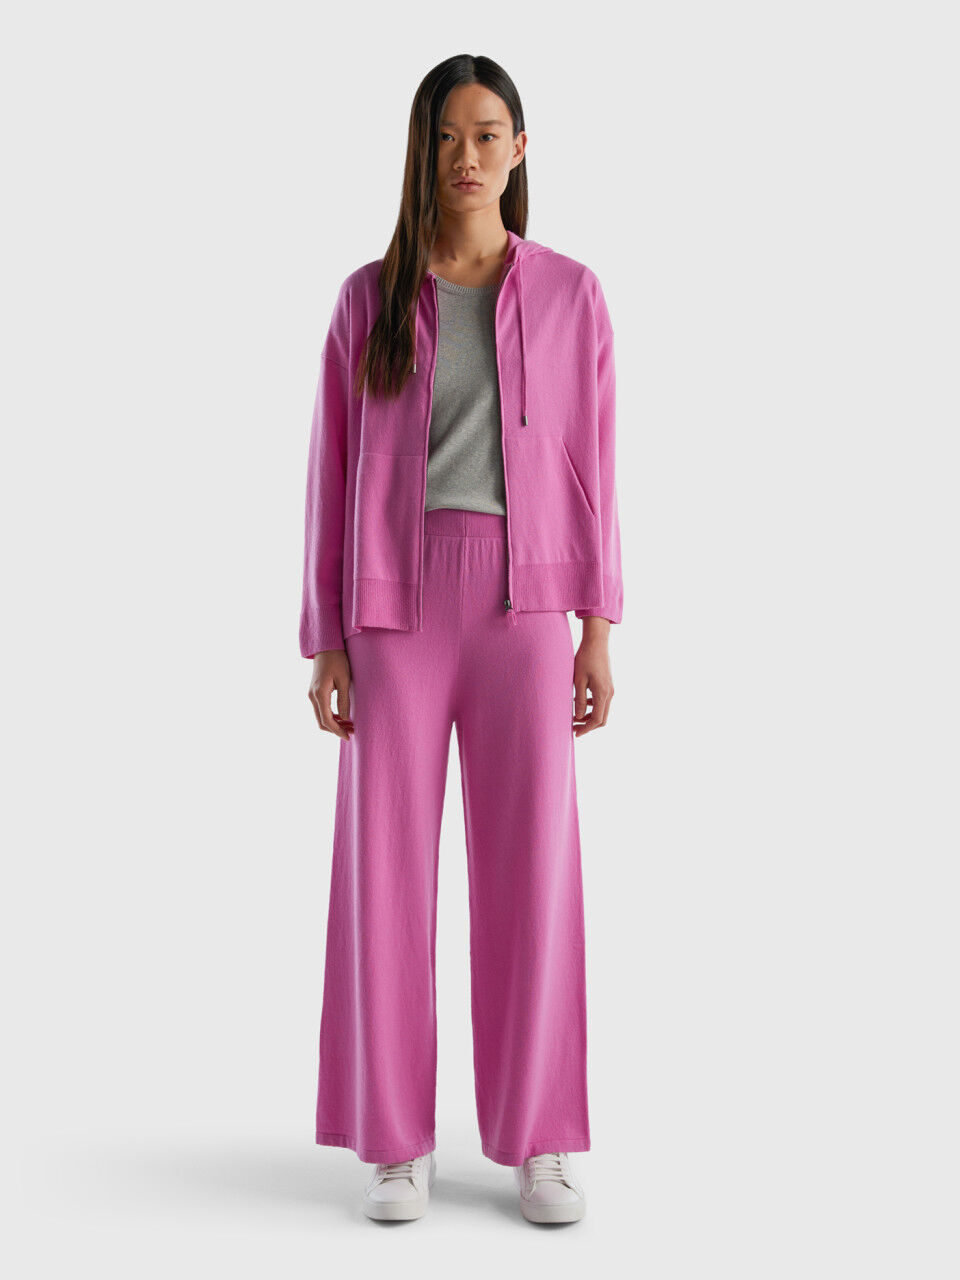 Pink trousers in wool and cashmere blend